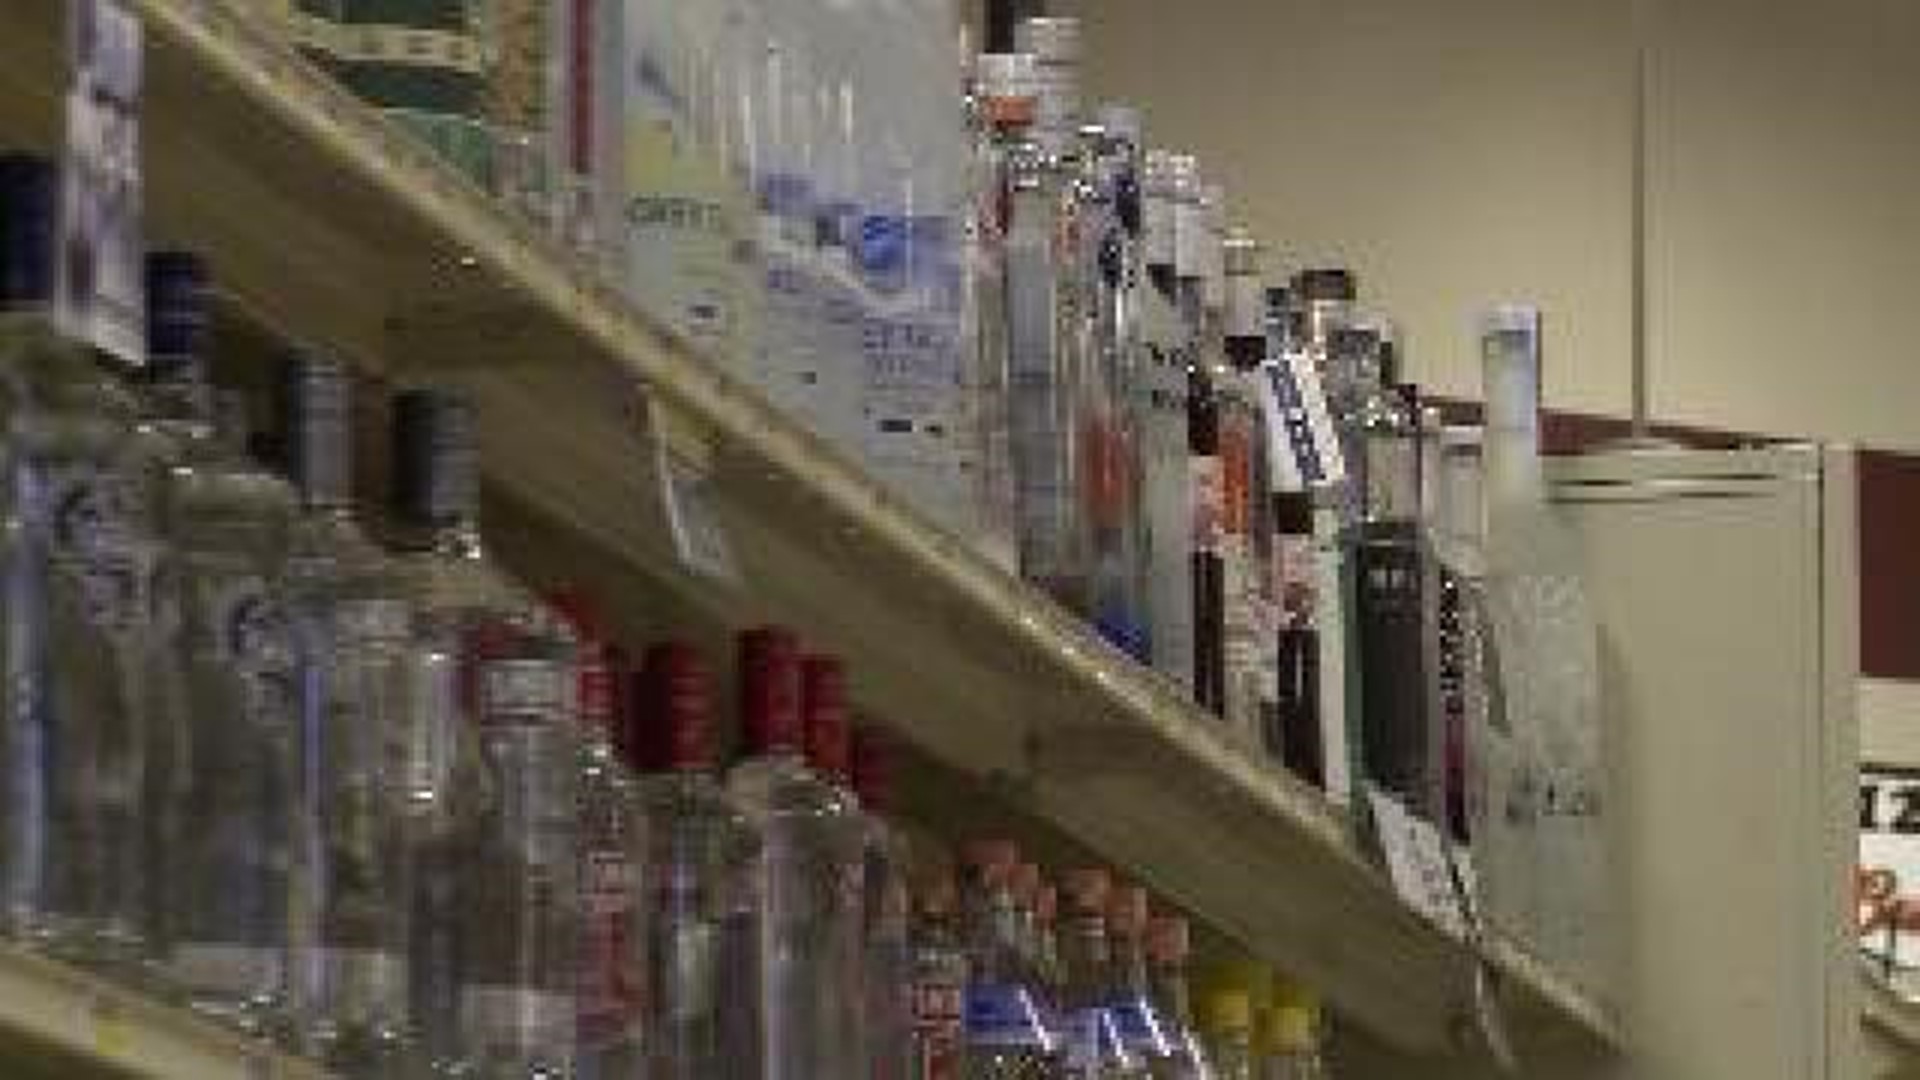 Wet/Dry Issue Vote doesn\'t mean liquor stores will go up immediately